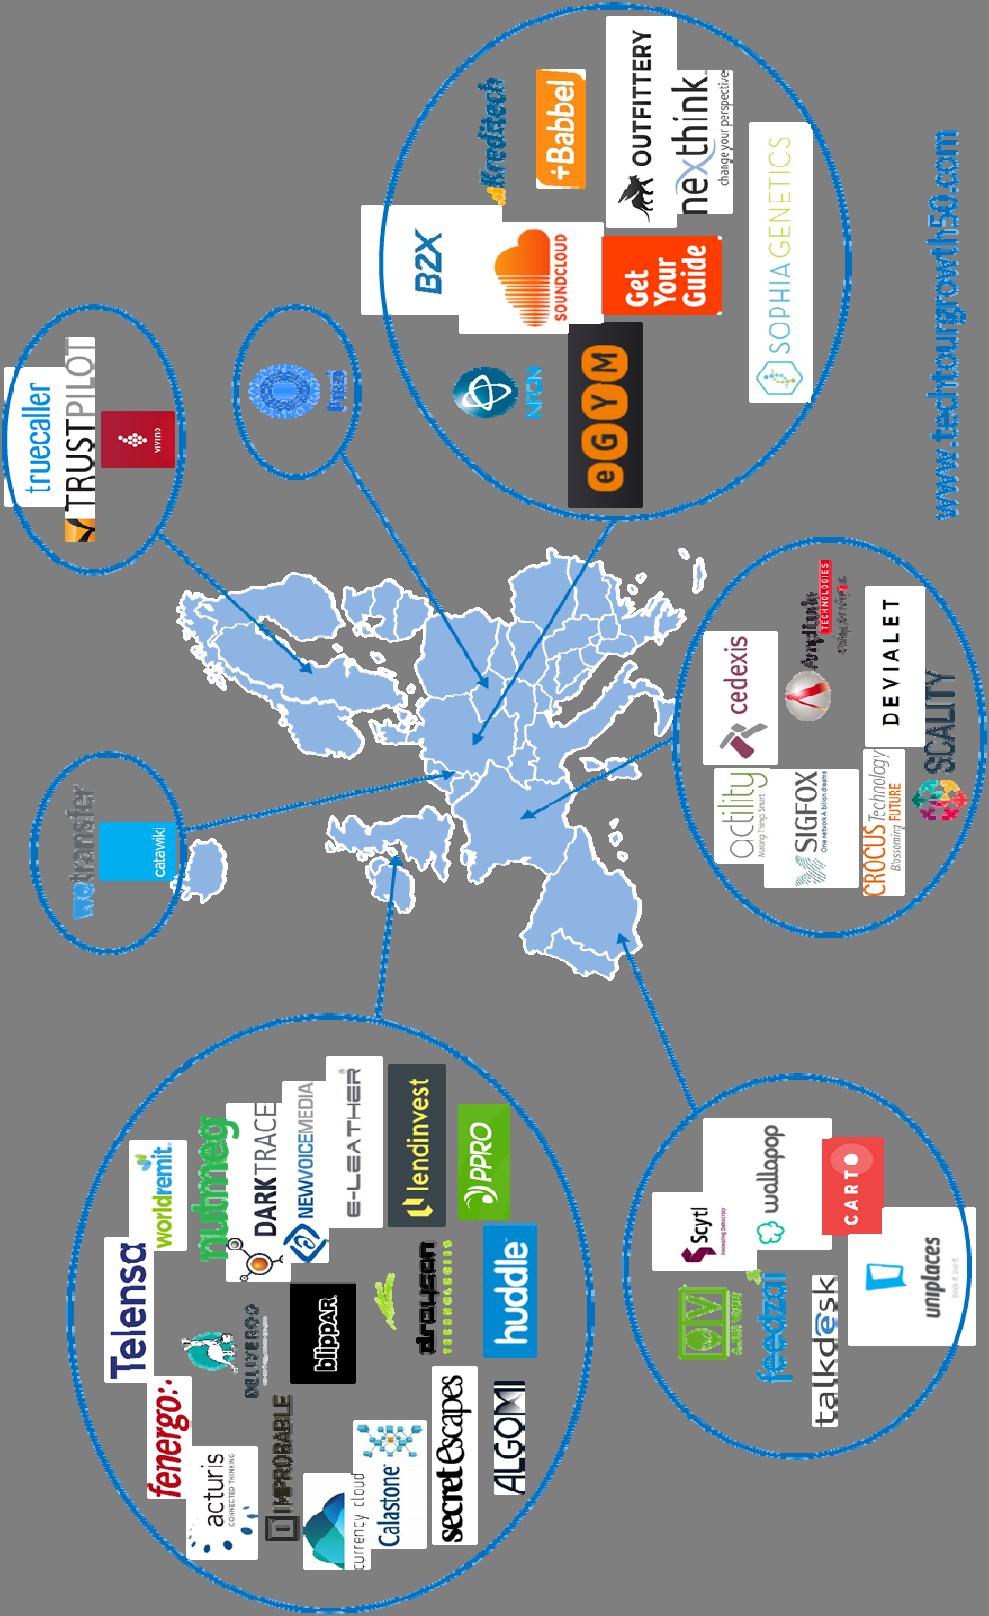 international investors researched and evaluated over 280 European private tech companies at a